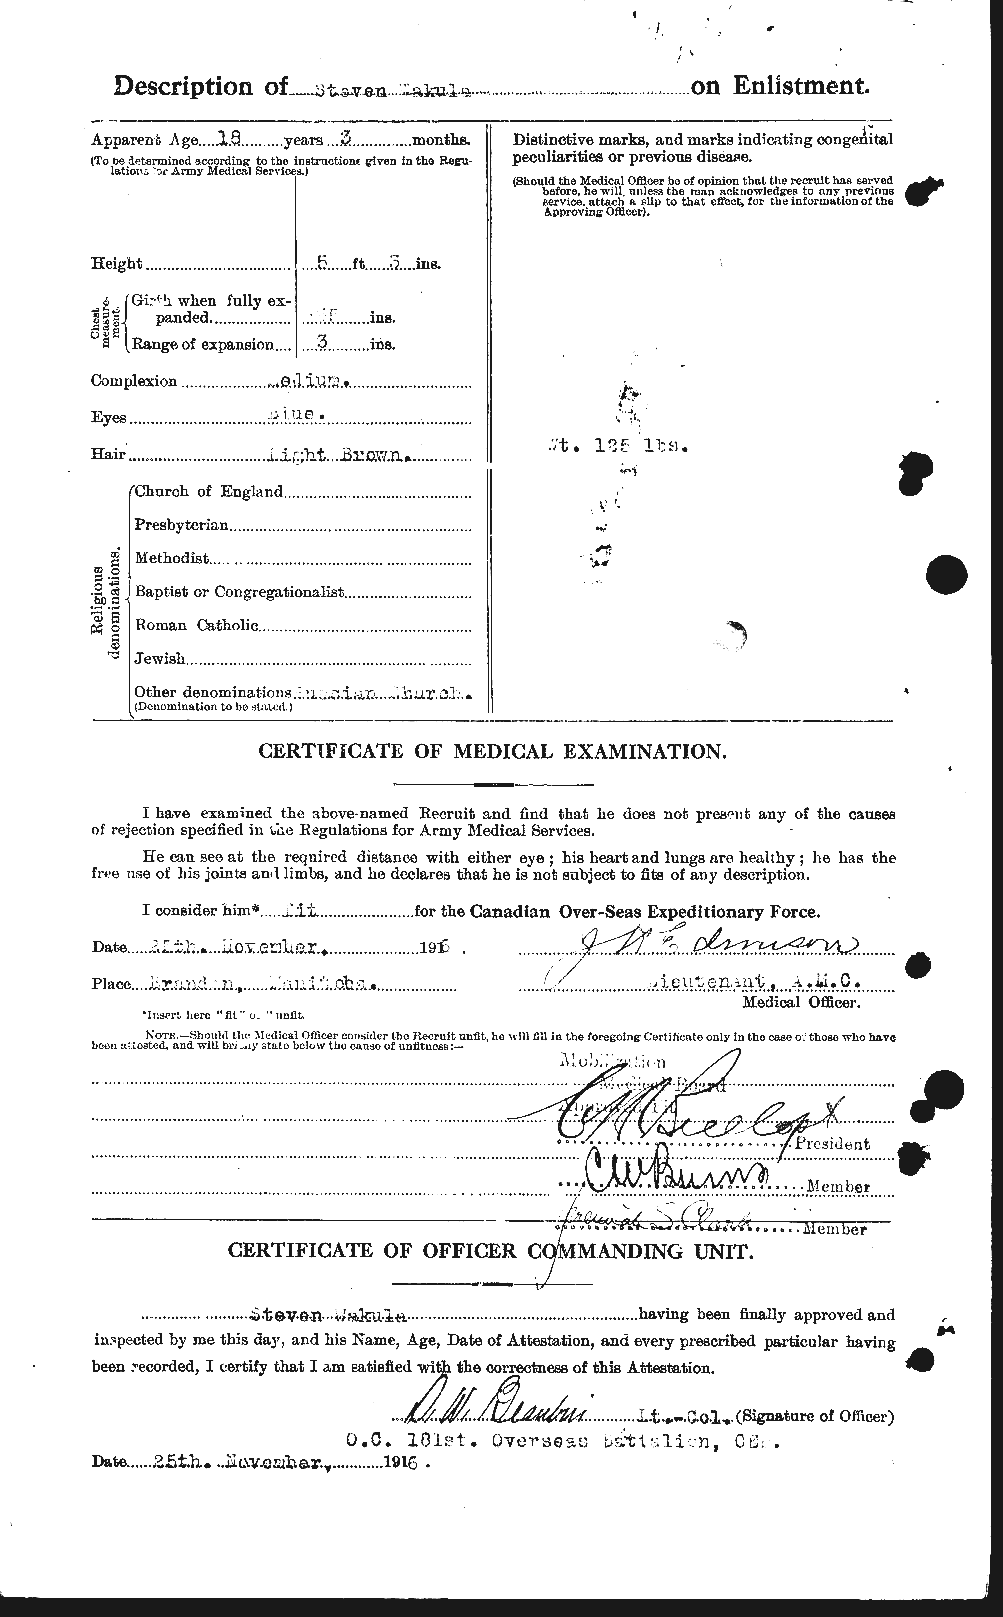 Personnel Records of the First World War - CEF 656127b